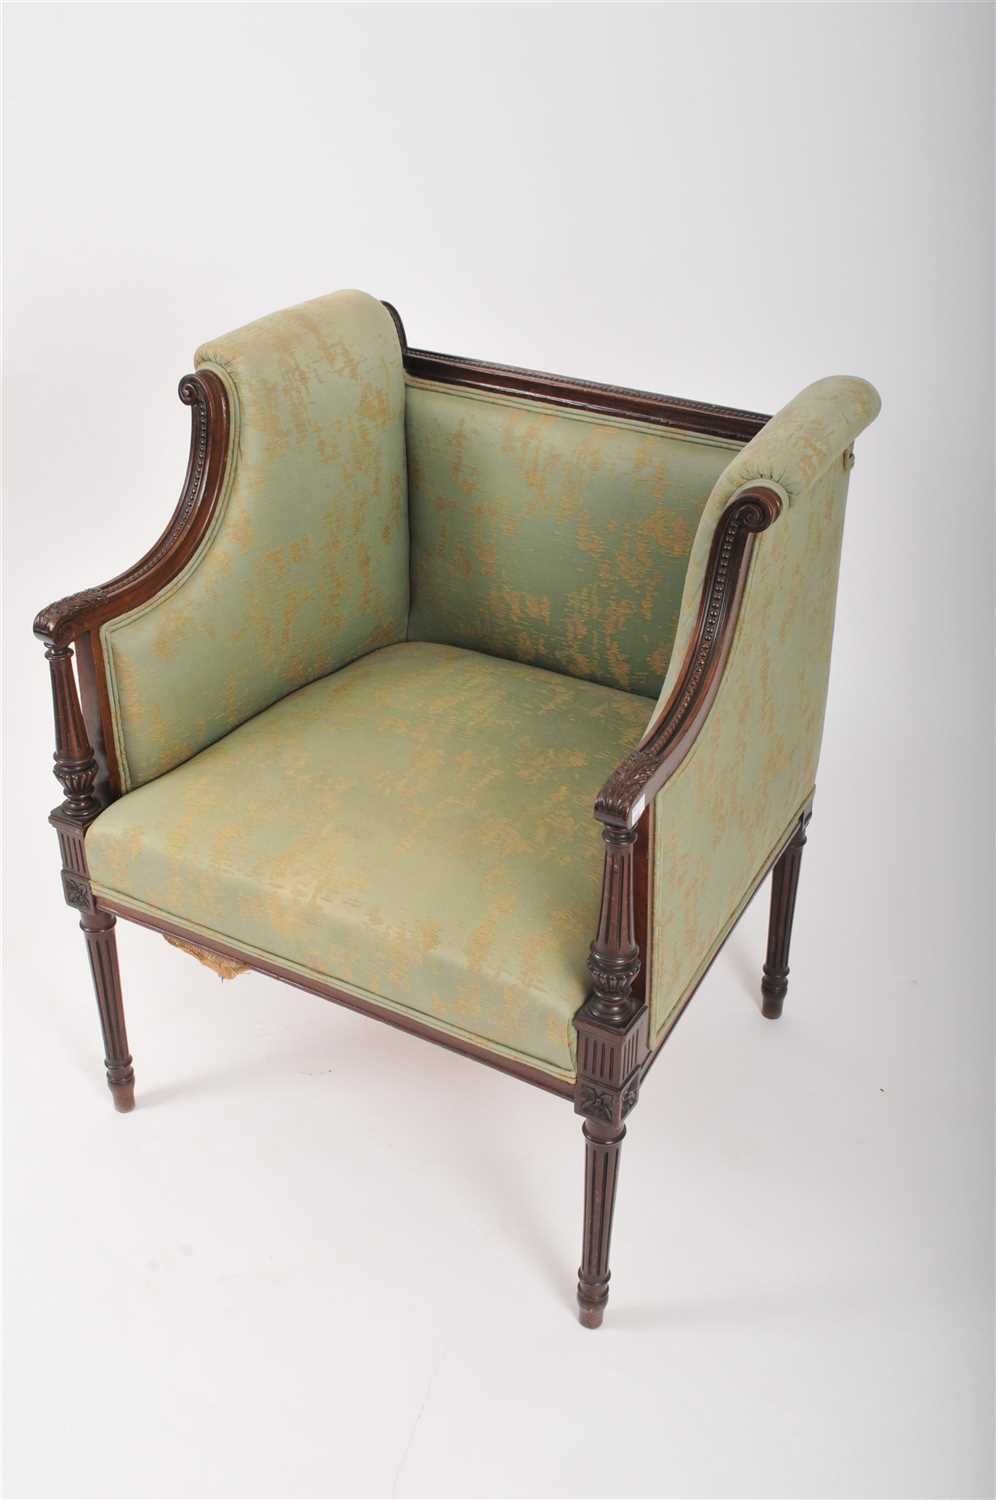 A rosewood framed upholstered box tub chair